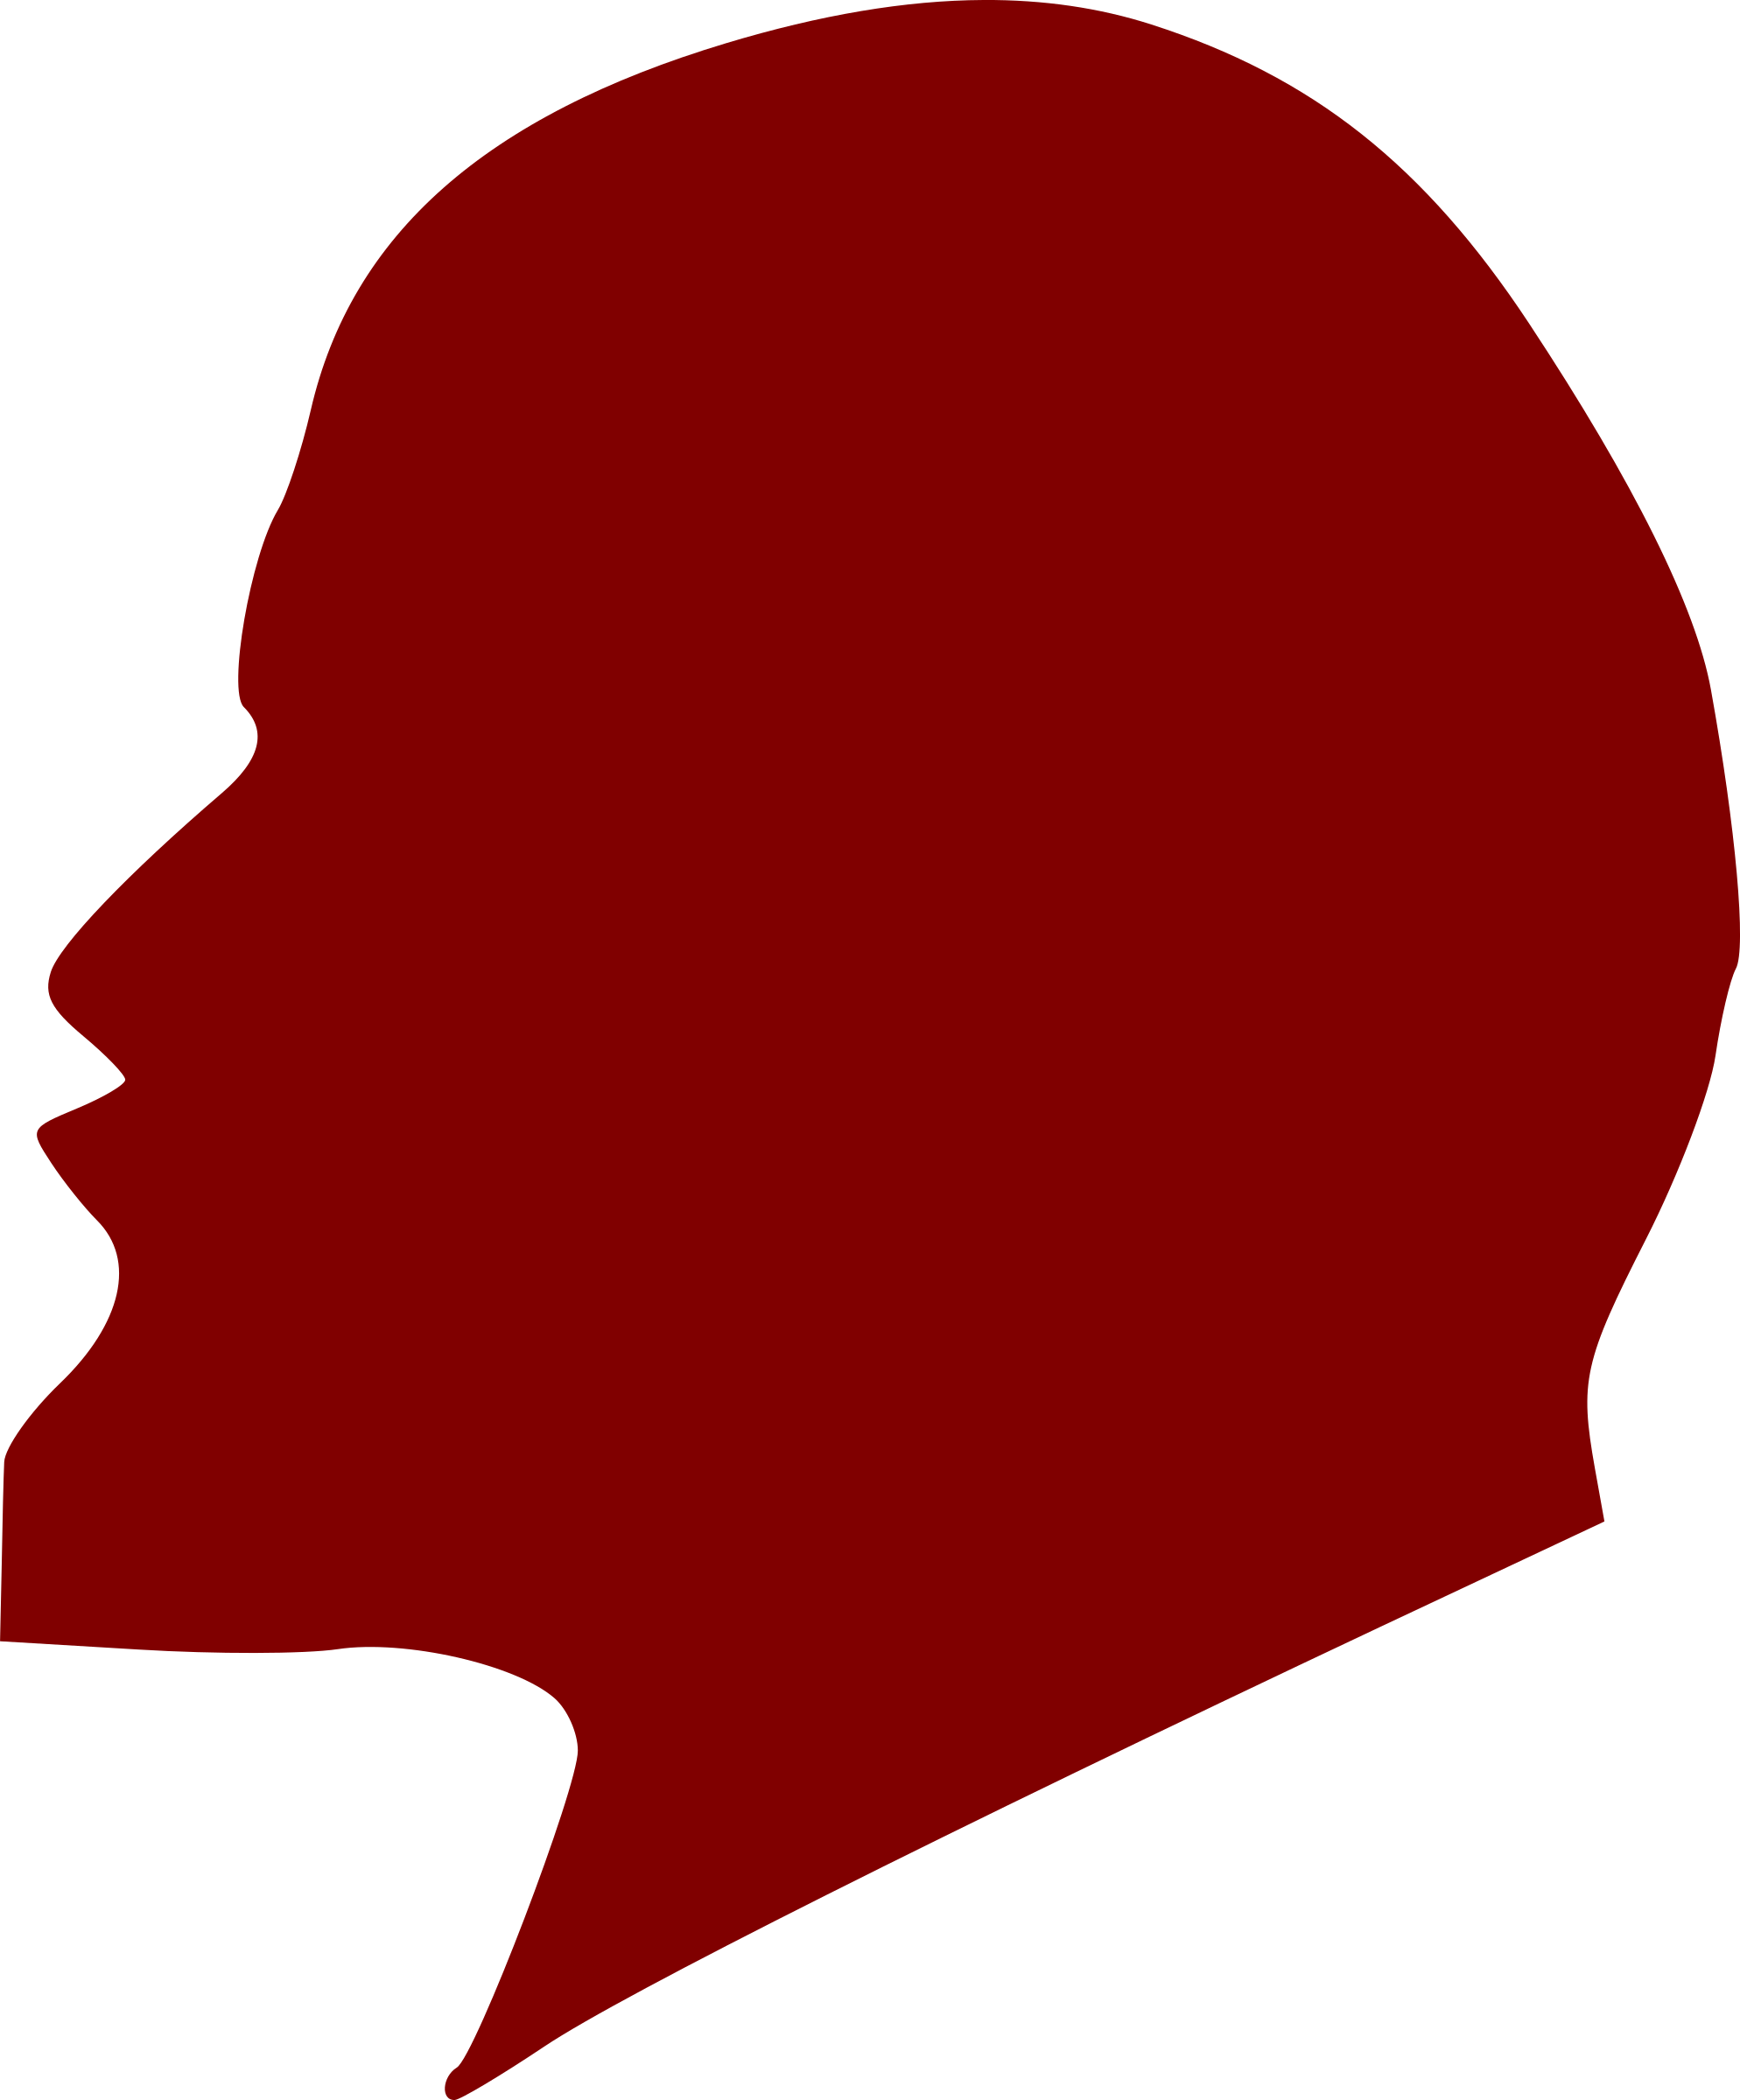 A Red Silhouette Of A Person's Head